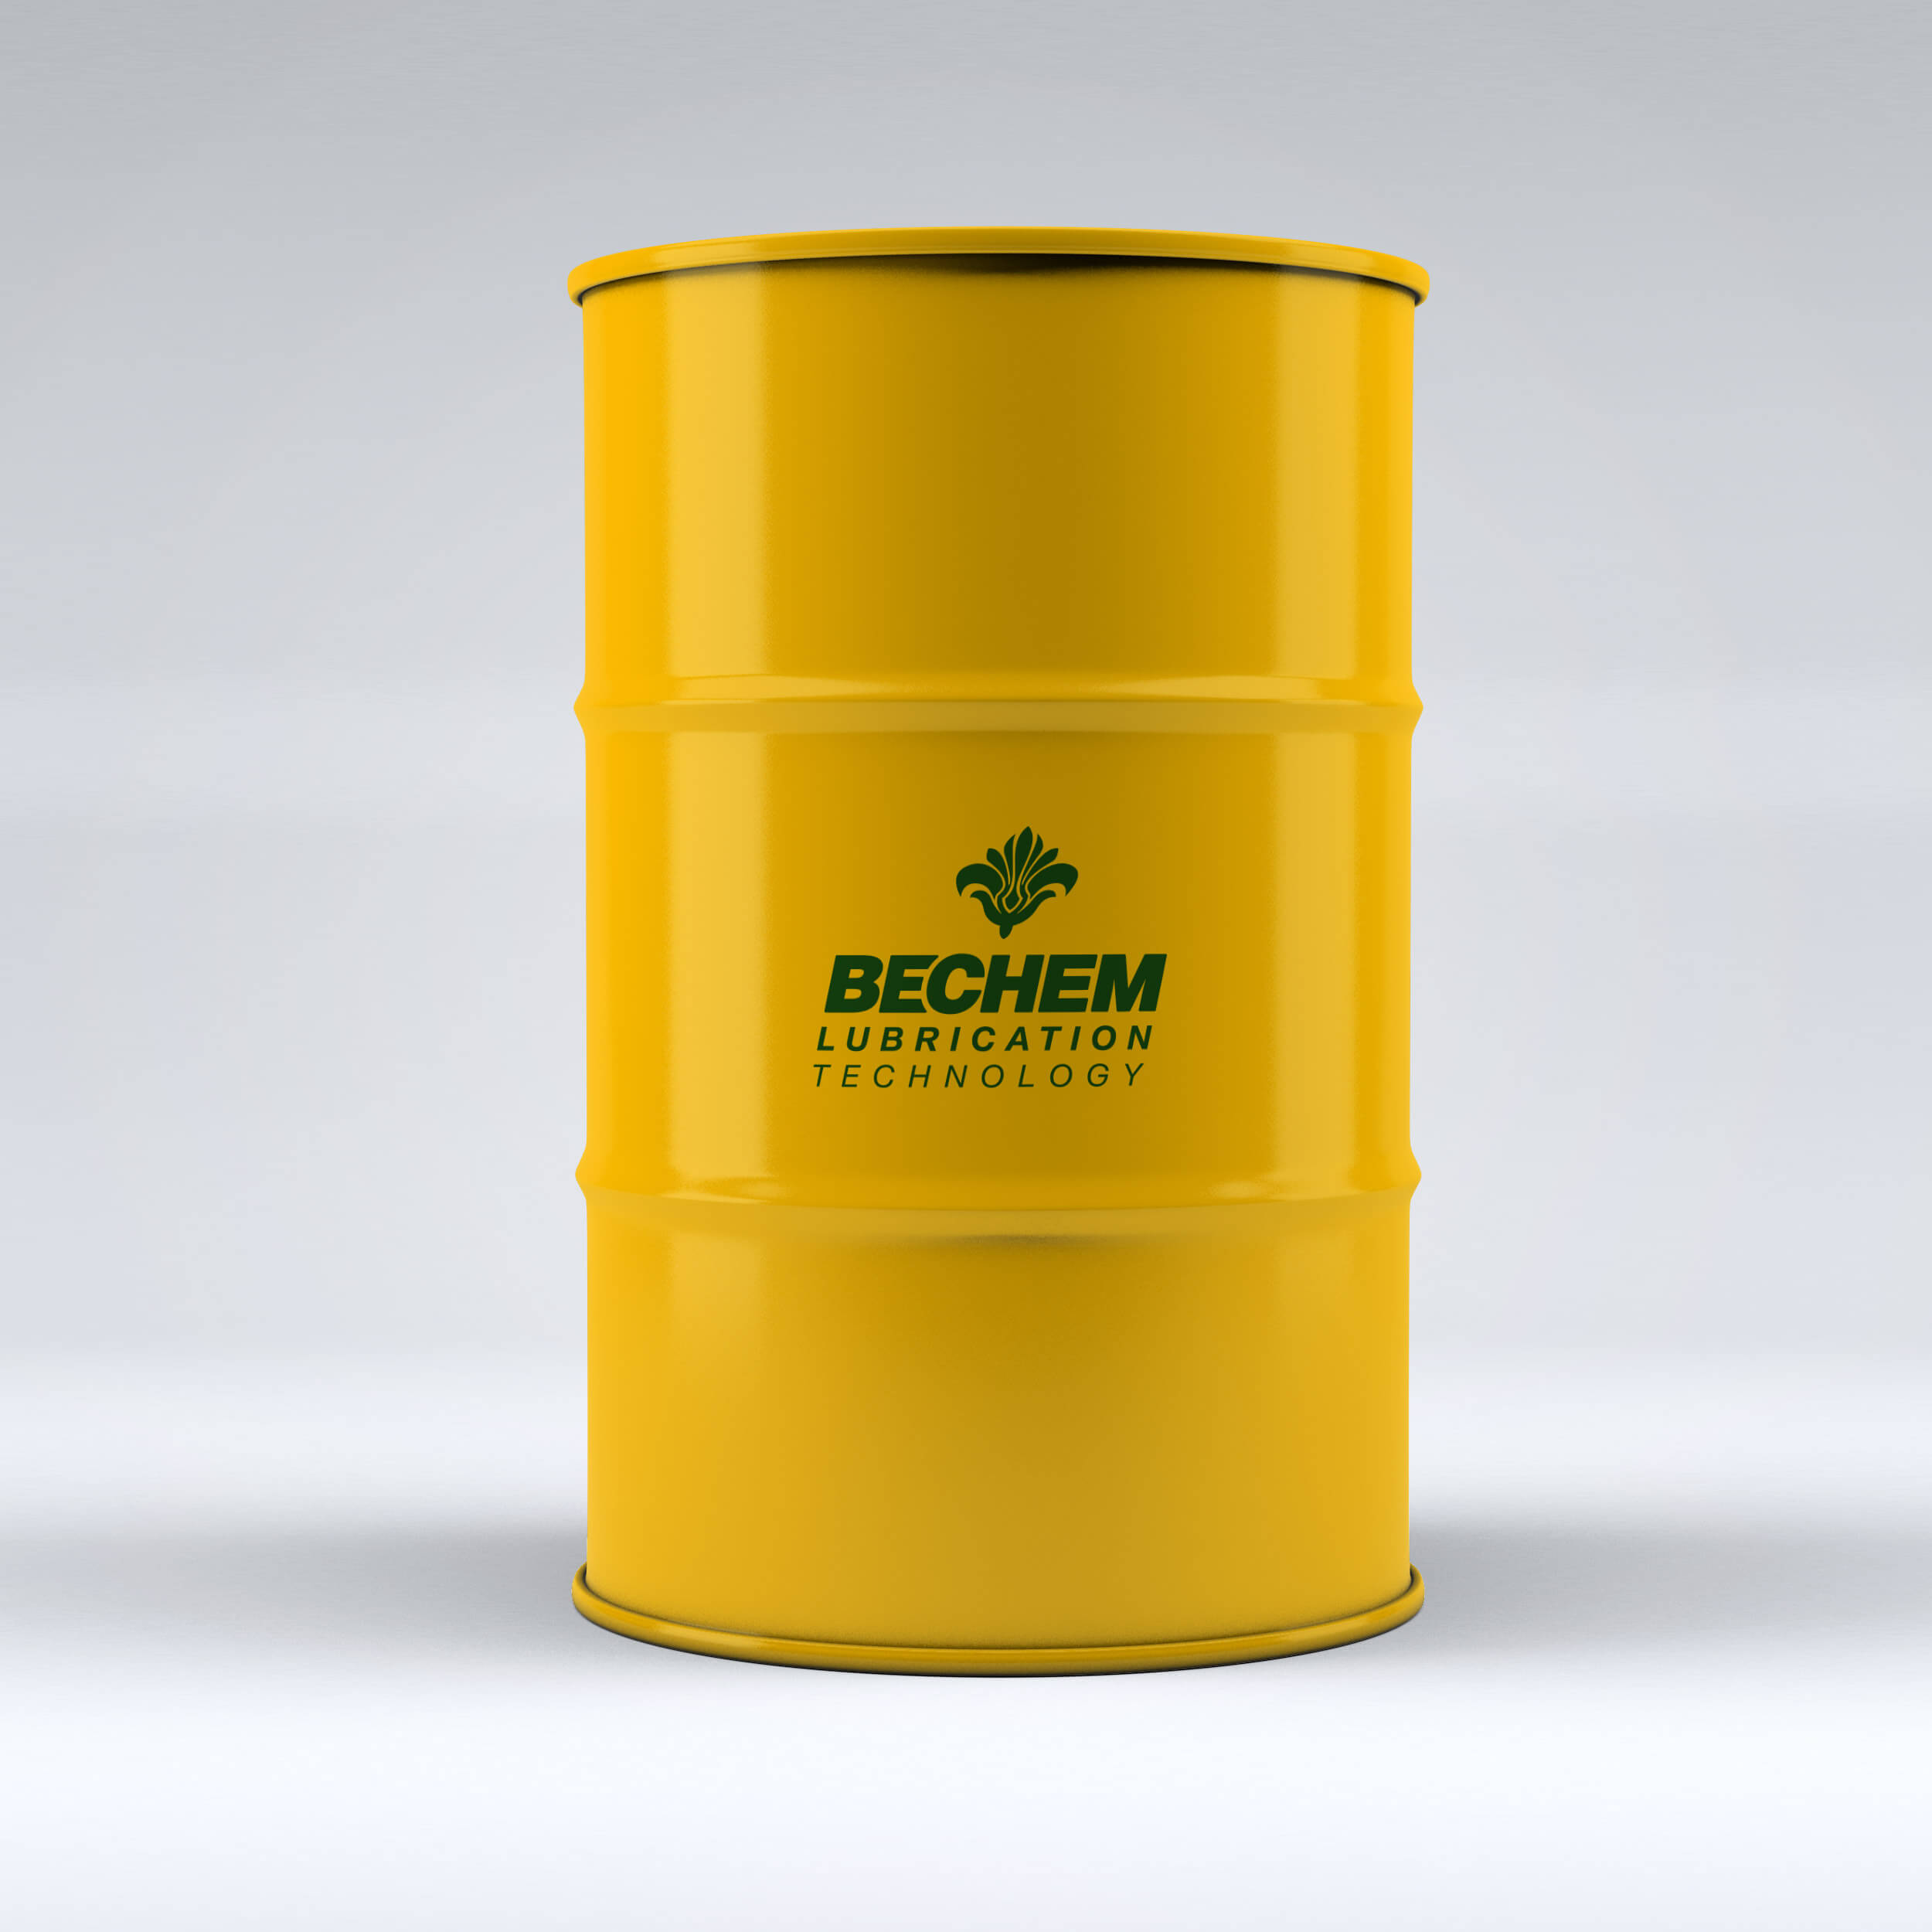 Berulub SSG 334 - Lubricating Greases - Products - BECHEM